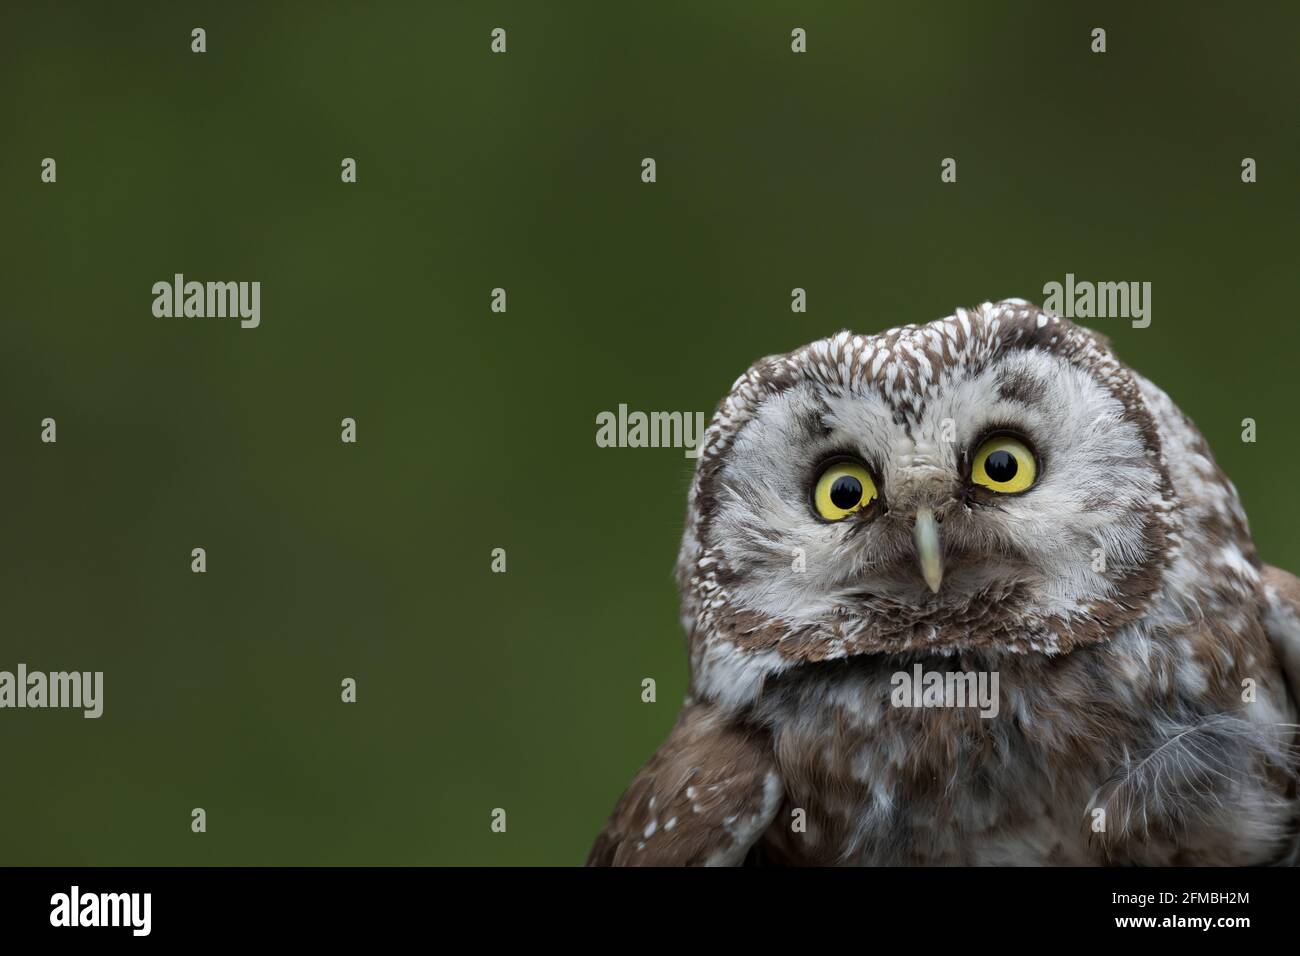 Portrait of an owl from Finland. Stock Photo